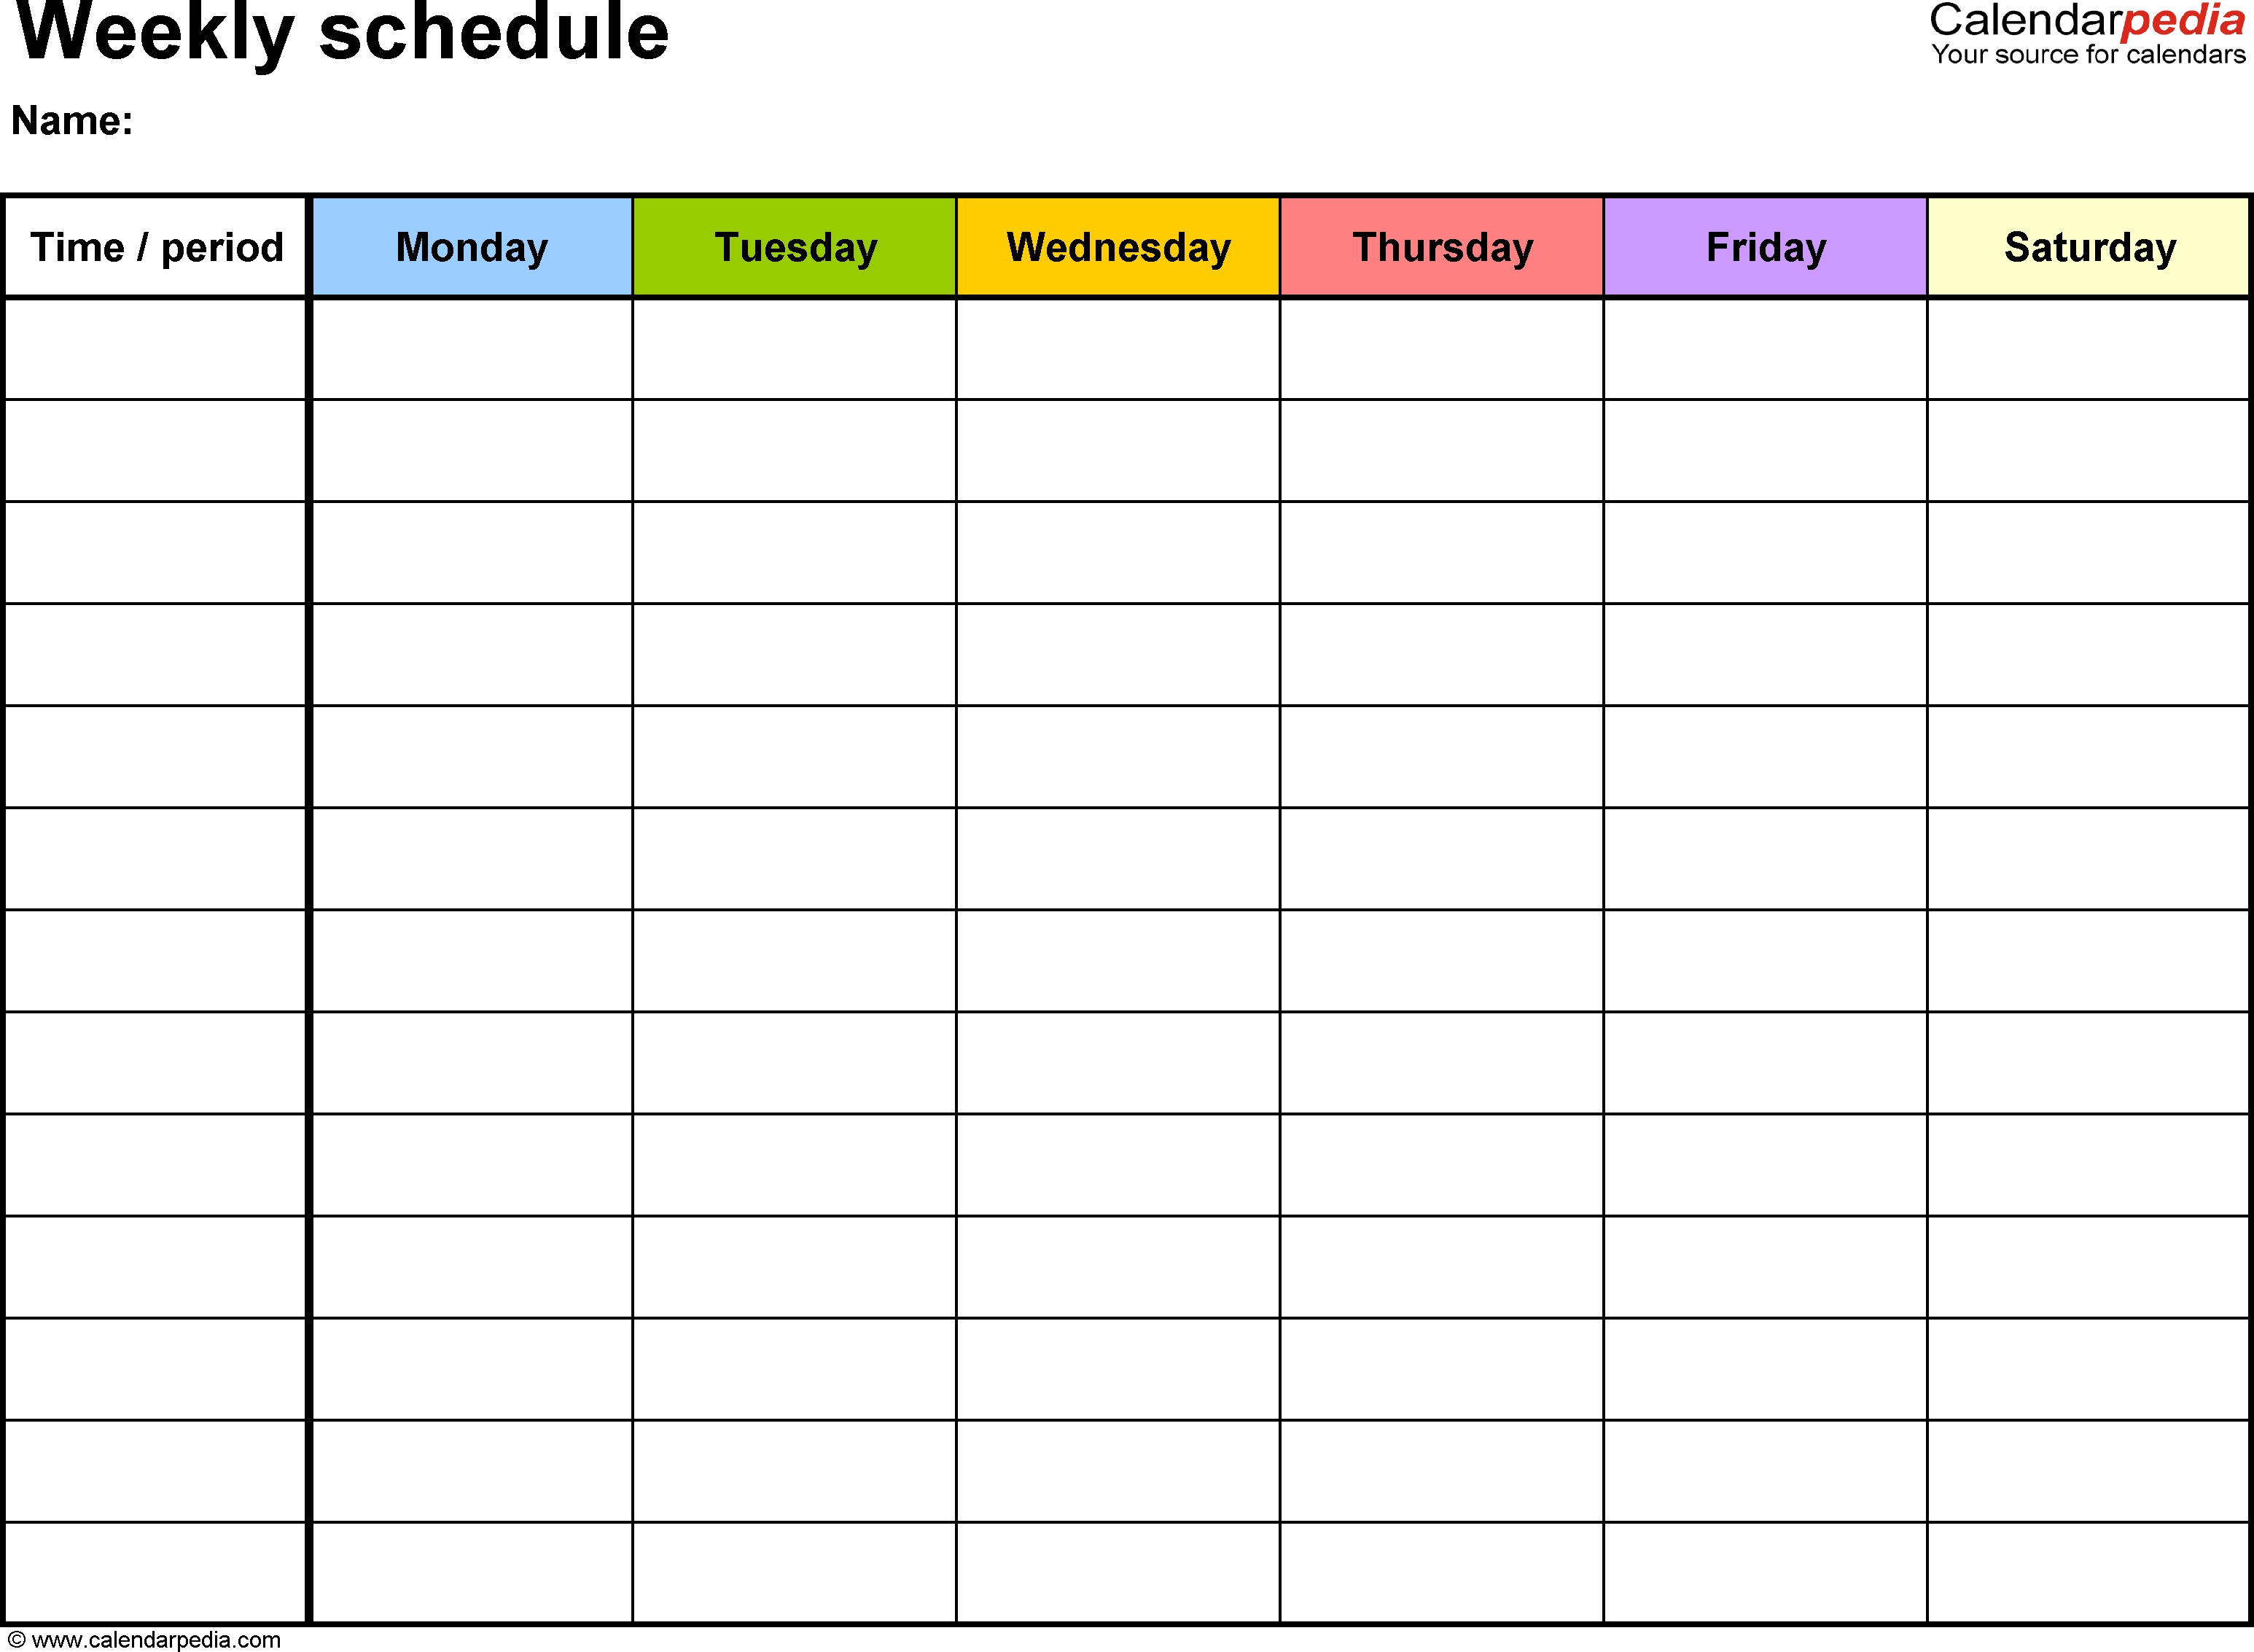 Free Weekly Schedule Templates For Word - 18 Templates-Monday Friday Calendar Template Printable